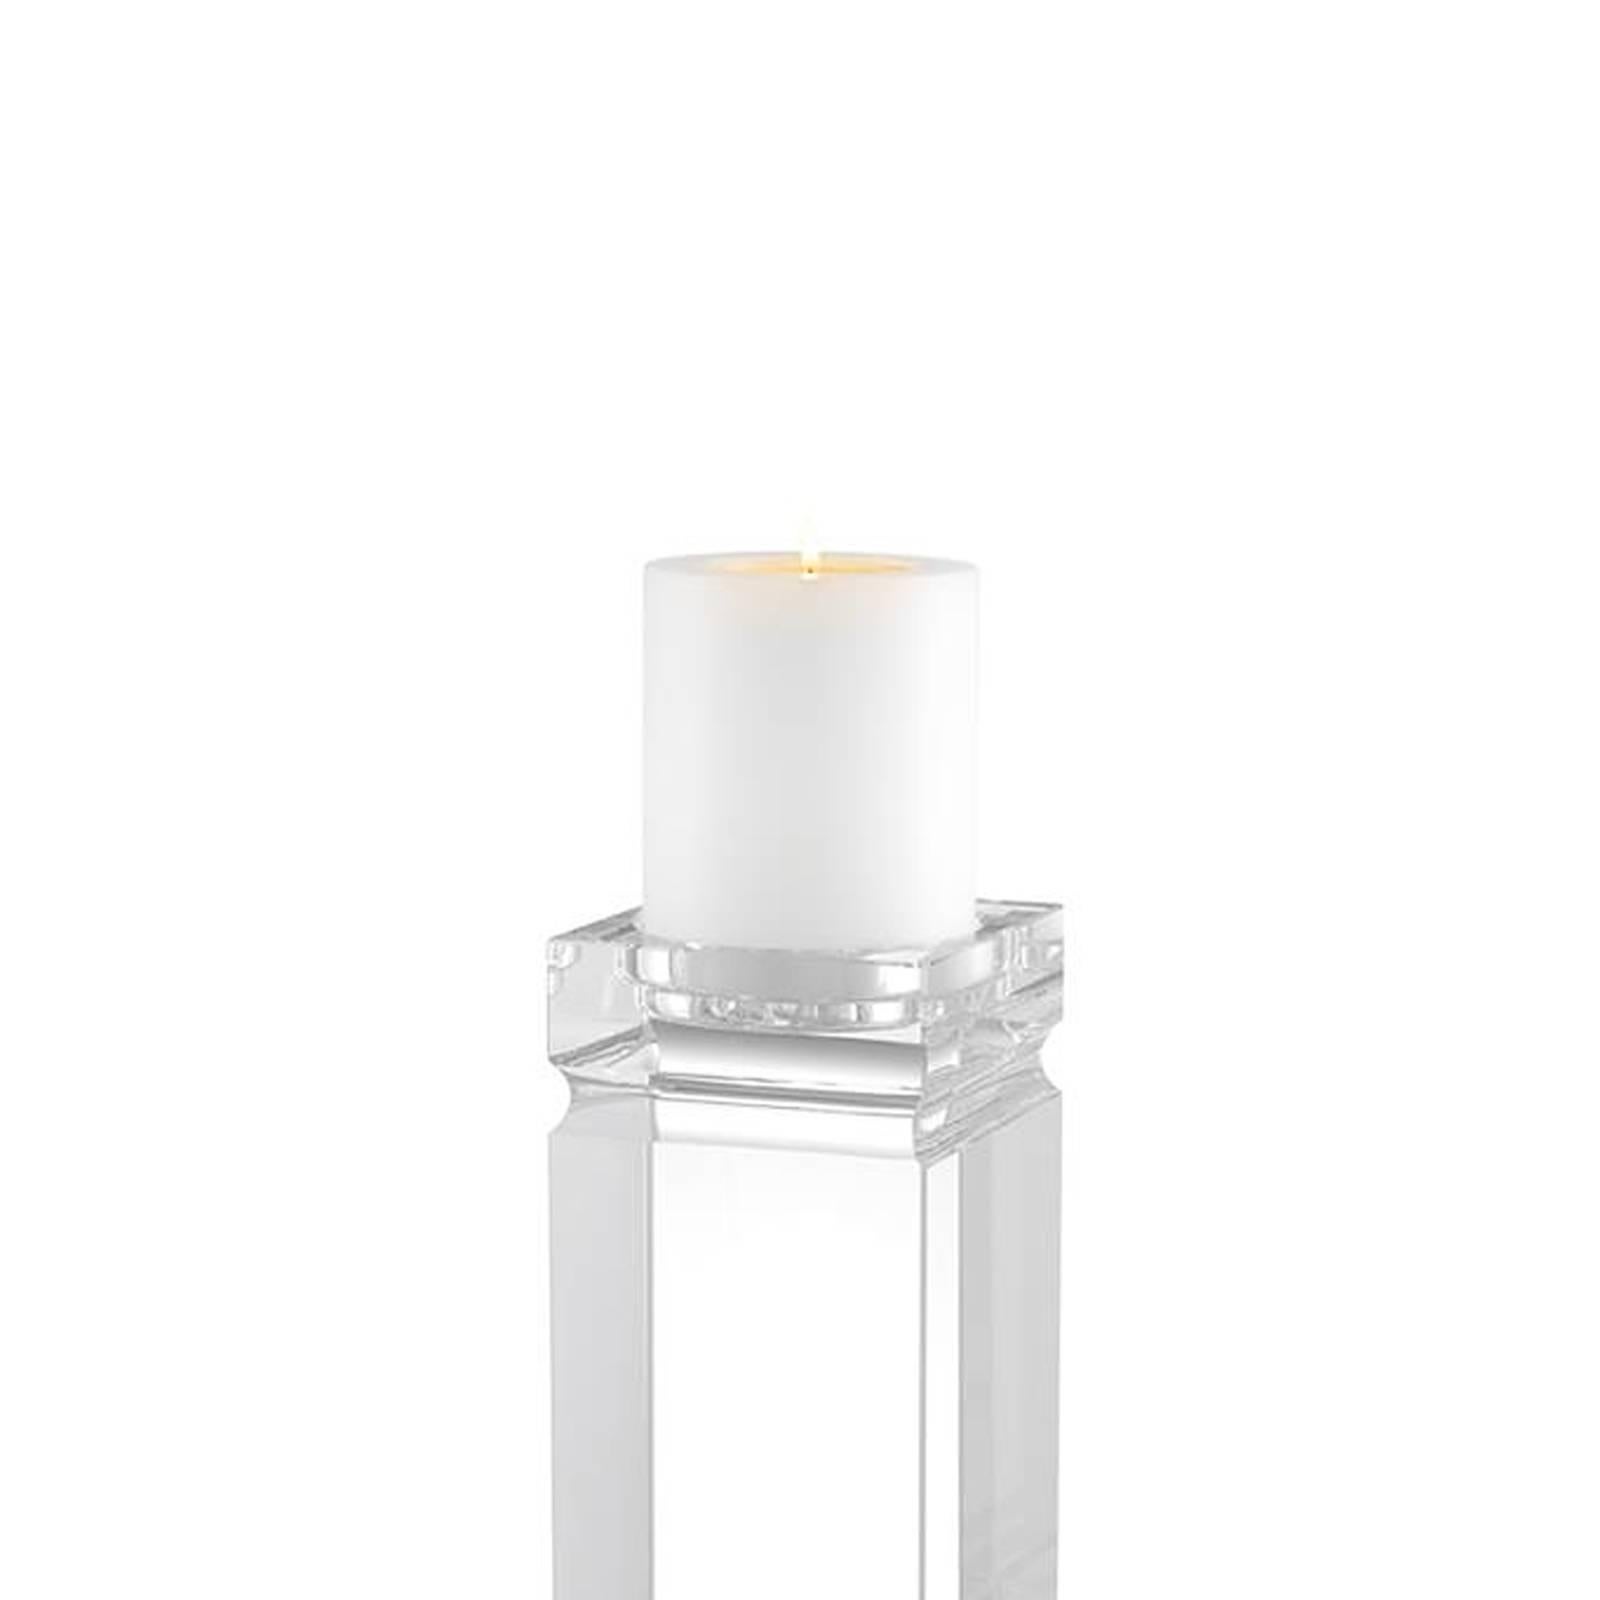 Candleholder crystal tour M in crystal galss.
Measures: L 12 x 12 x 31. Price 690,00€
Also available in crystal tour L, L 12.5 x D 12.5 x H 40 cm.
Price : 790,00€
Candle not included.
